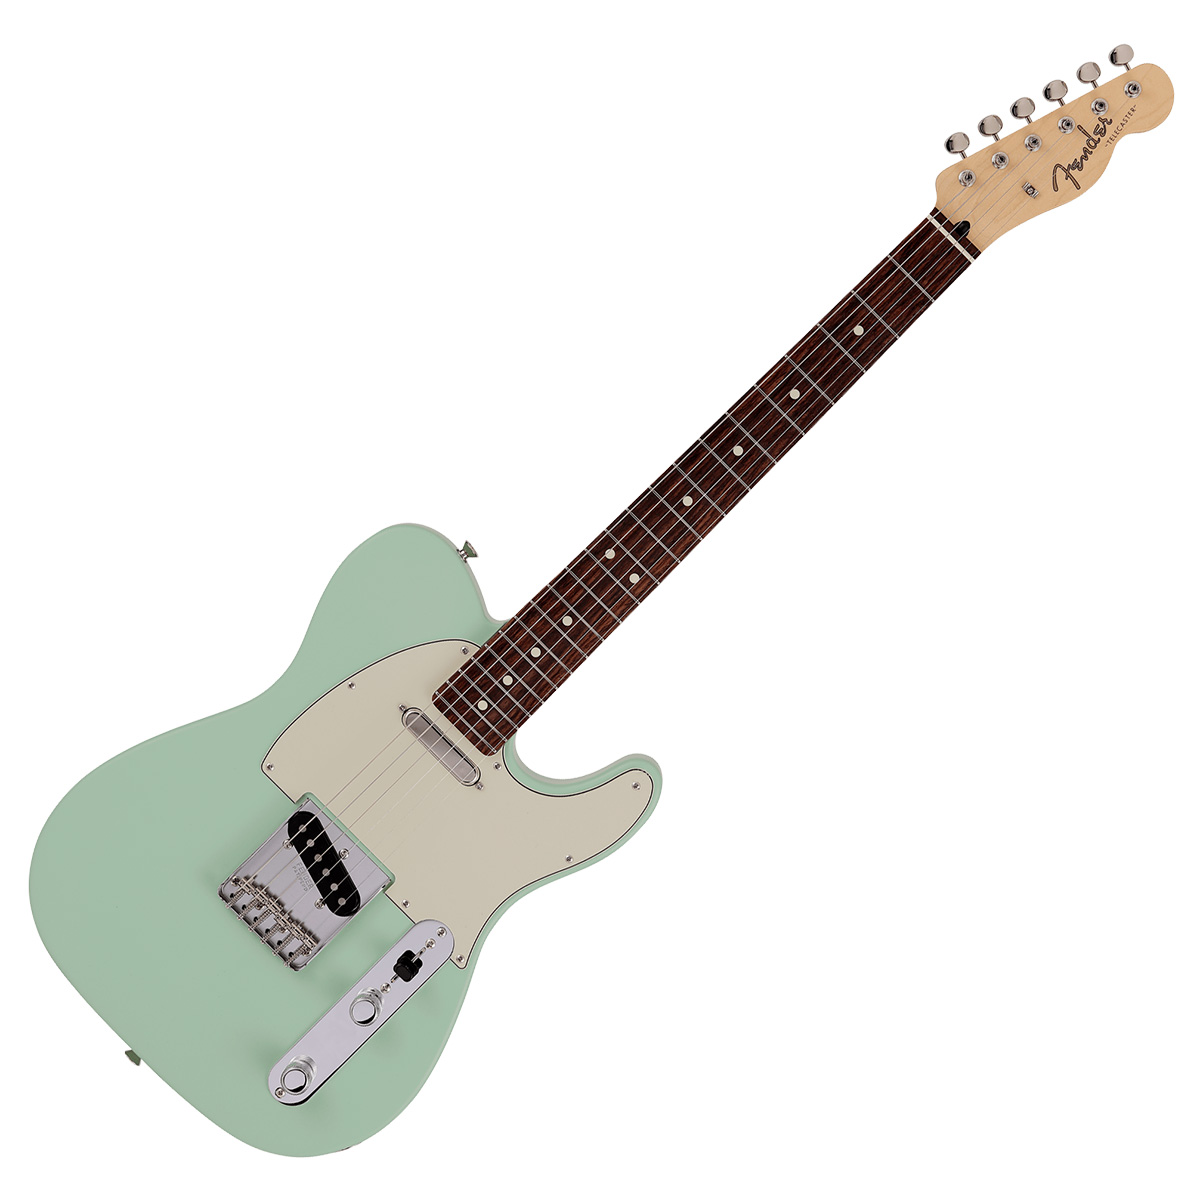 Fender Made in Japan Junior Collection Telecaster エレキギター テレキャスター フェンダー 【  イオンモール土浦店 】